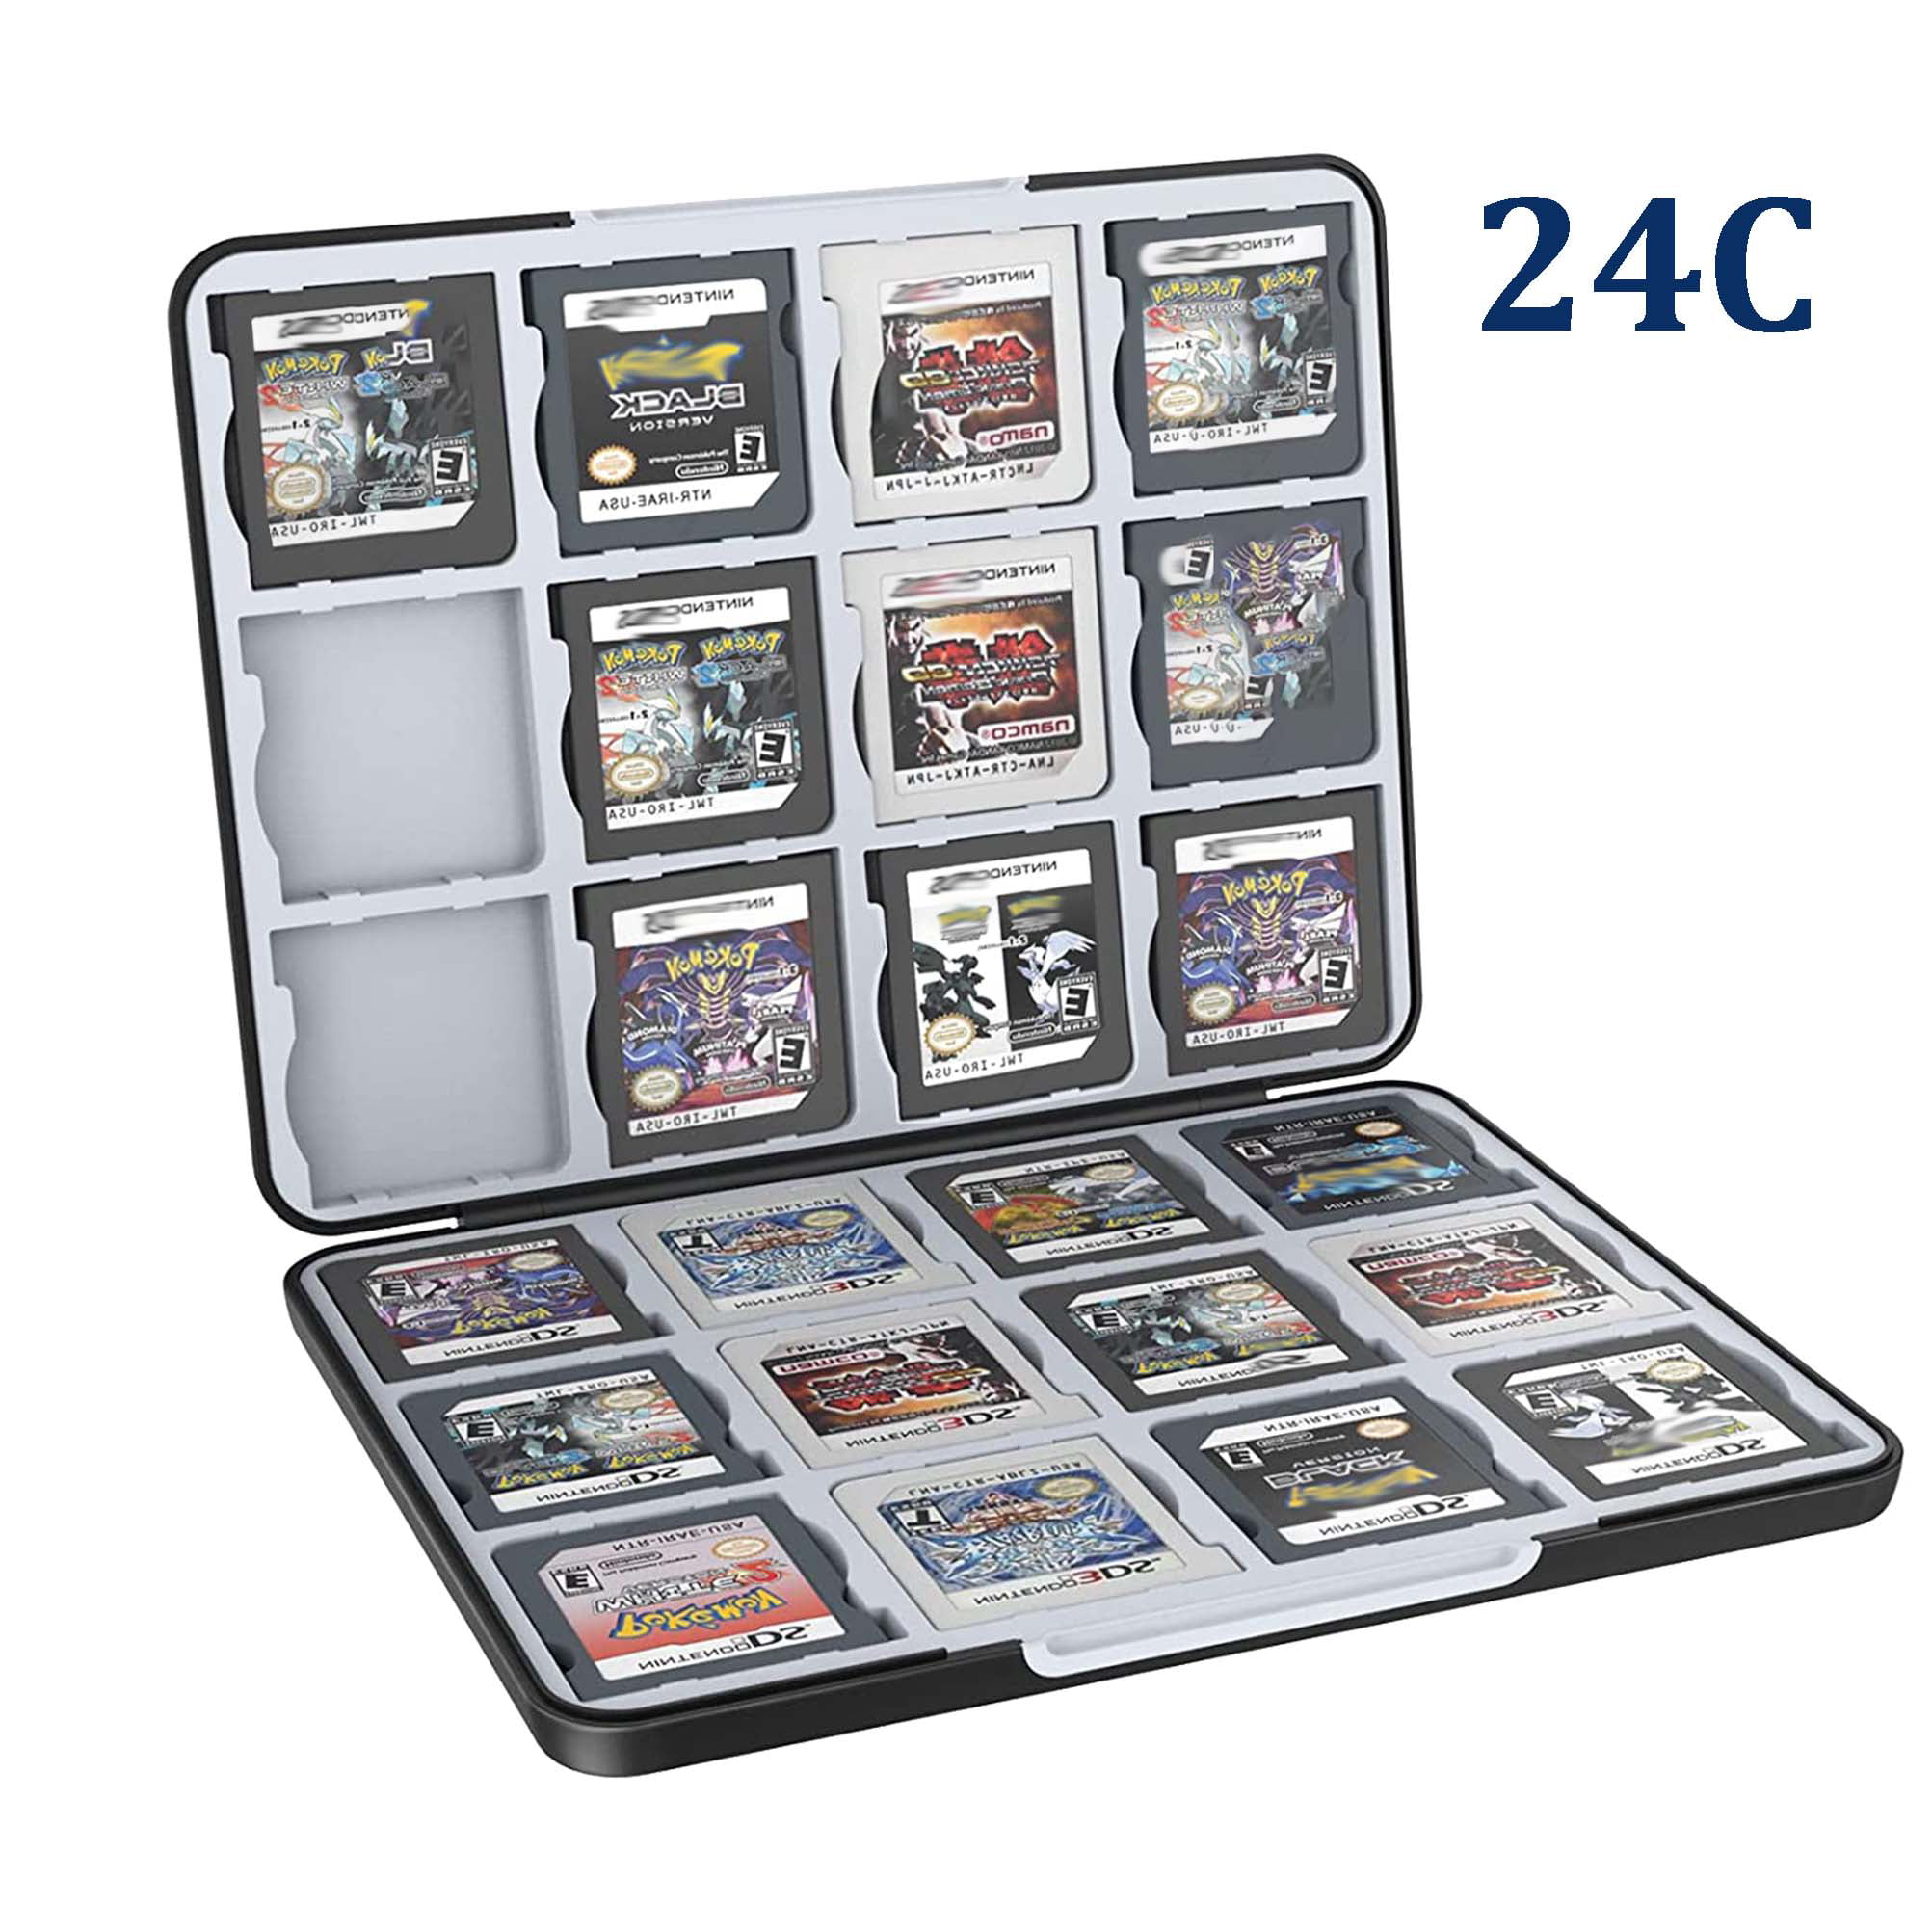  HEIYING Card Case for Nintendo 3DS 3DSXL 2DS 2DSXL DS DSi,Portable  3DS 2DS DS Game Cartridge Holder Storage with 24 Game Card Slots. : Video  Games